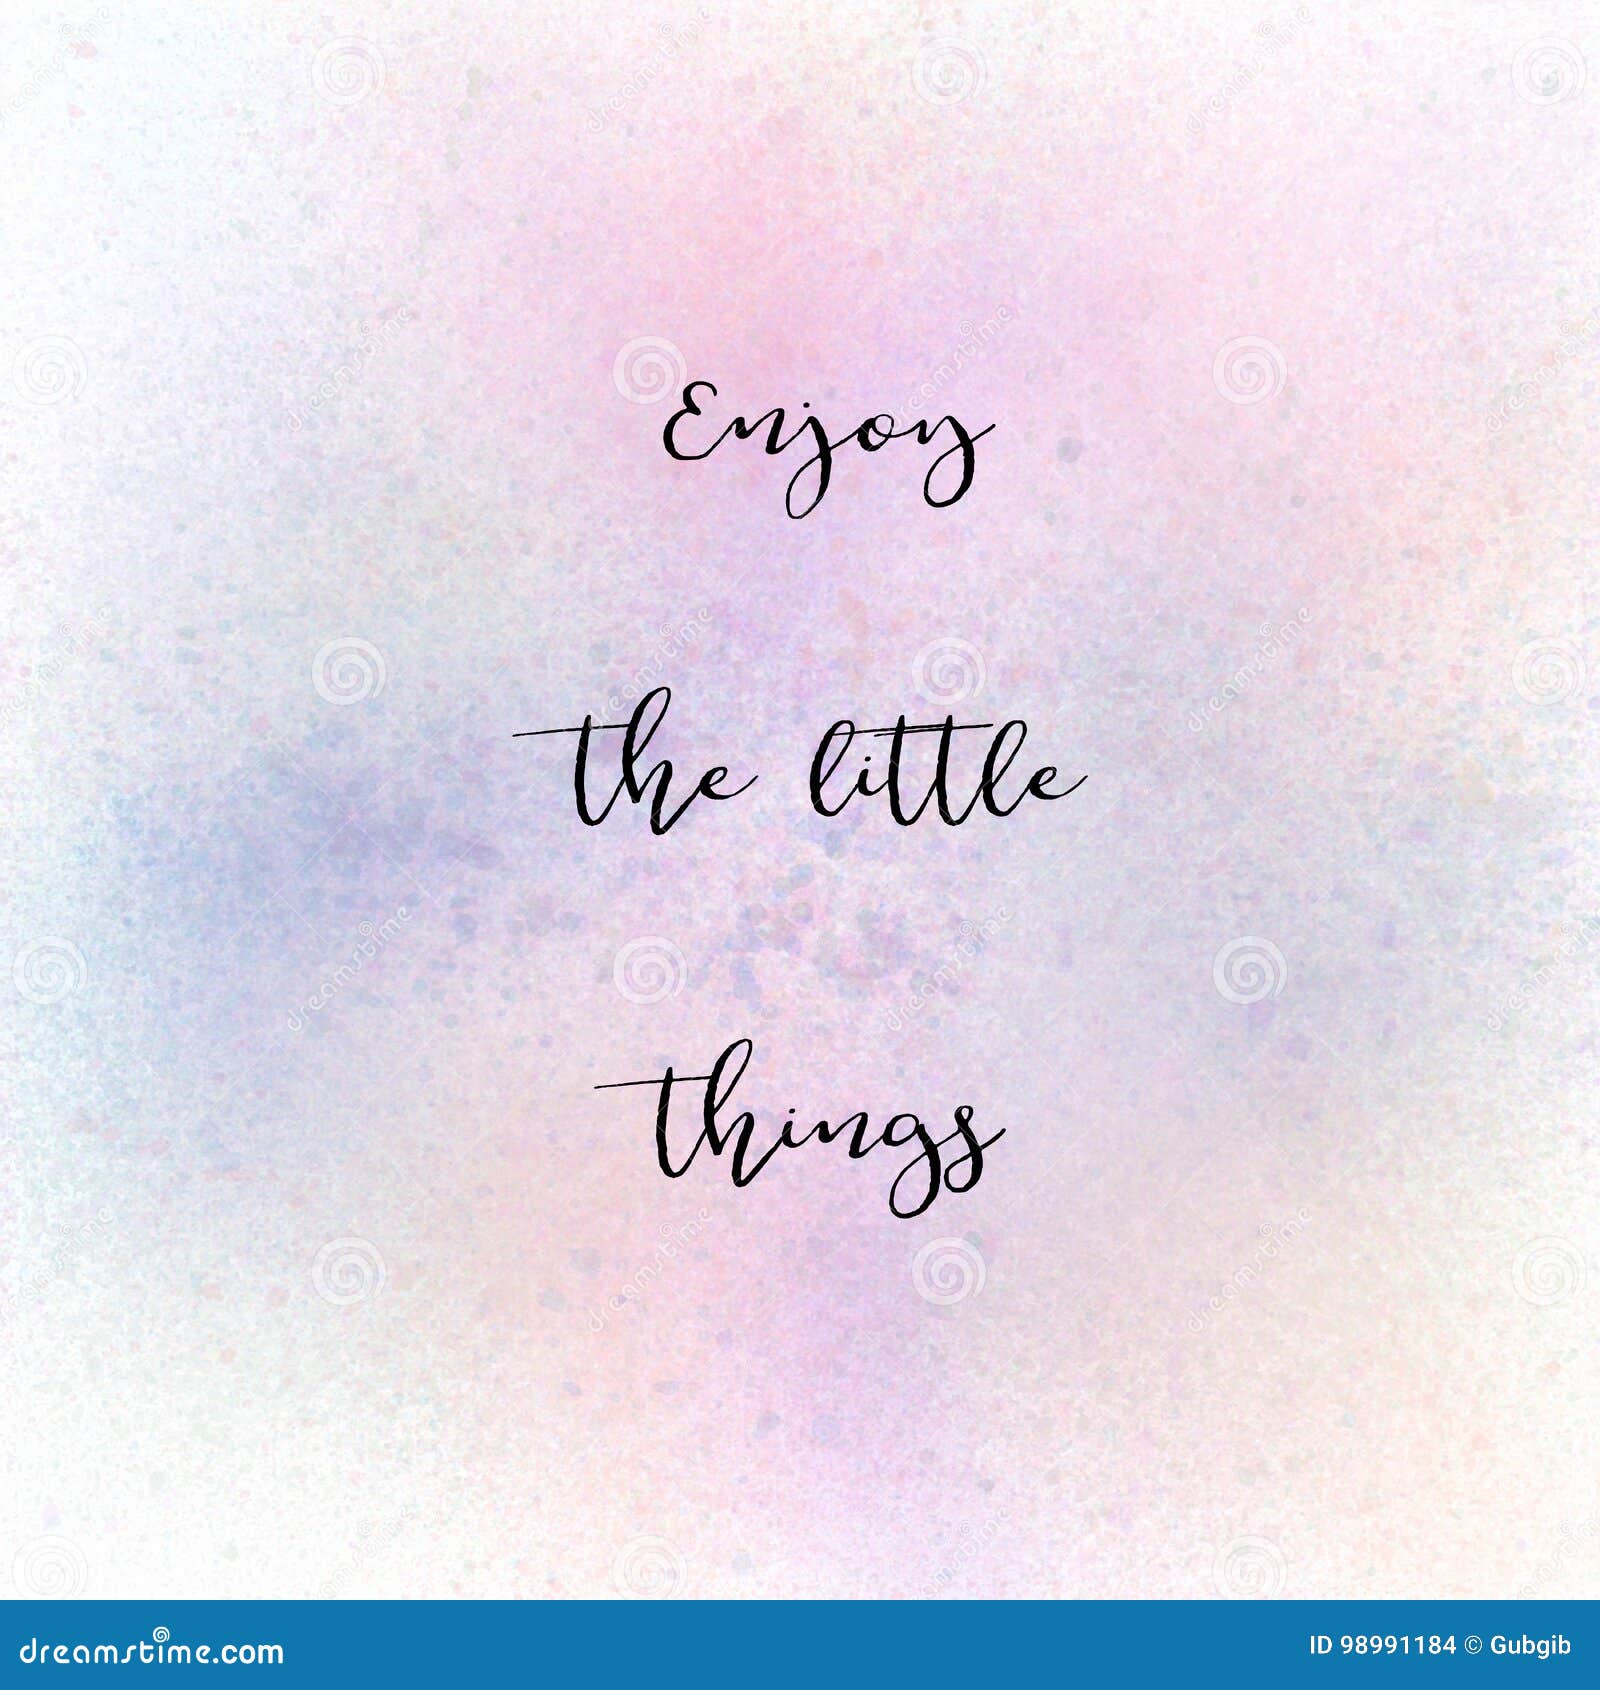 Enjoy The Little Things On Pastel Spray Paint Background